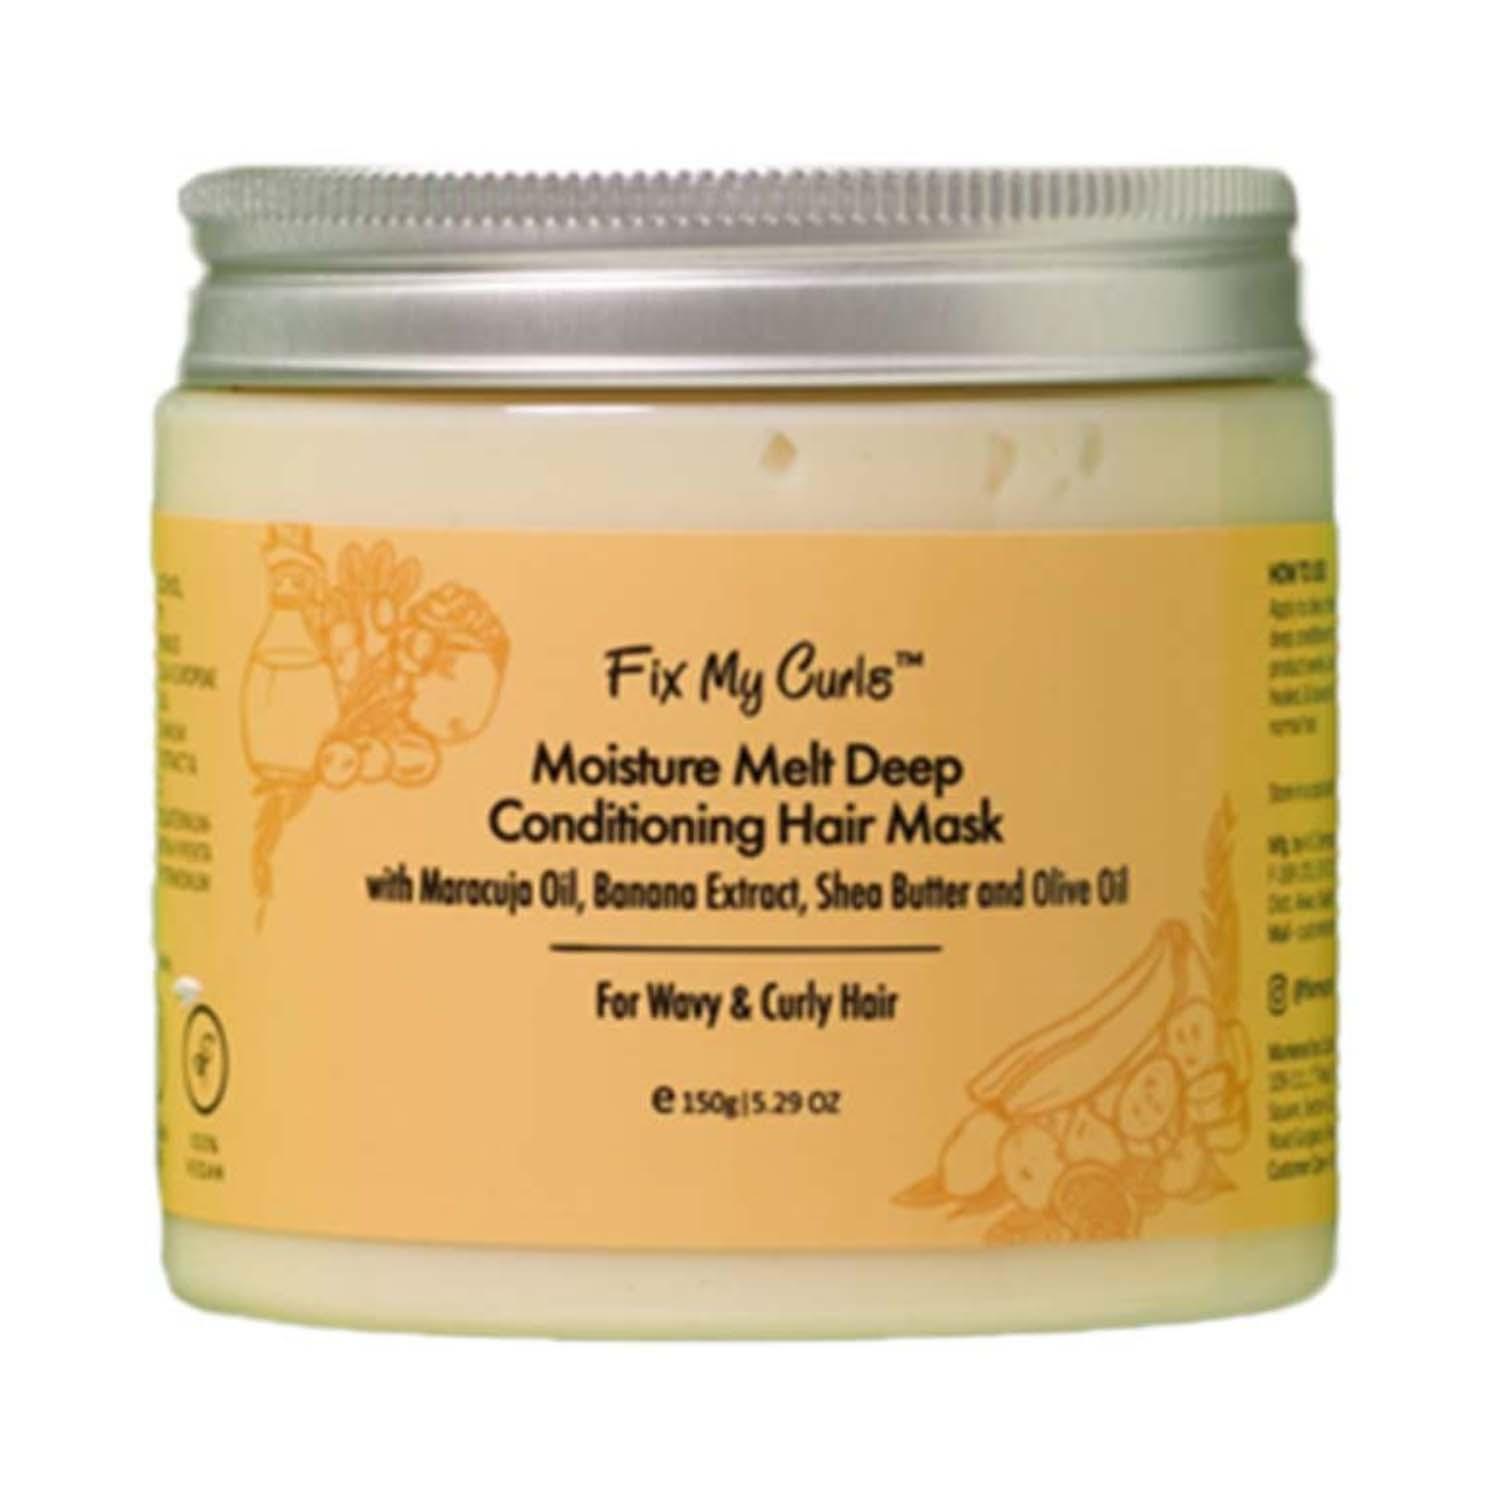 Fix My Curls | Fix My Curls Moisture Melt Deep Conditioning Hair Mask For Curly And Wavy Hair (150 g)